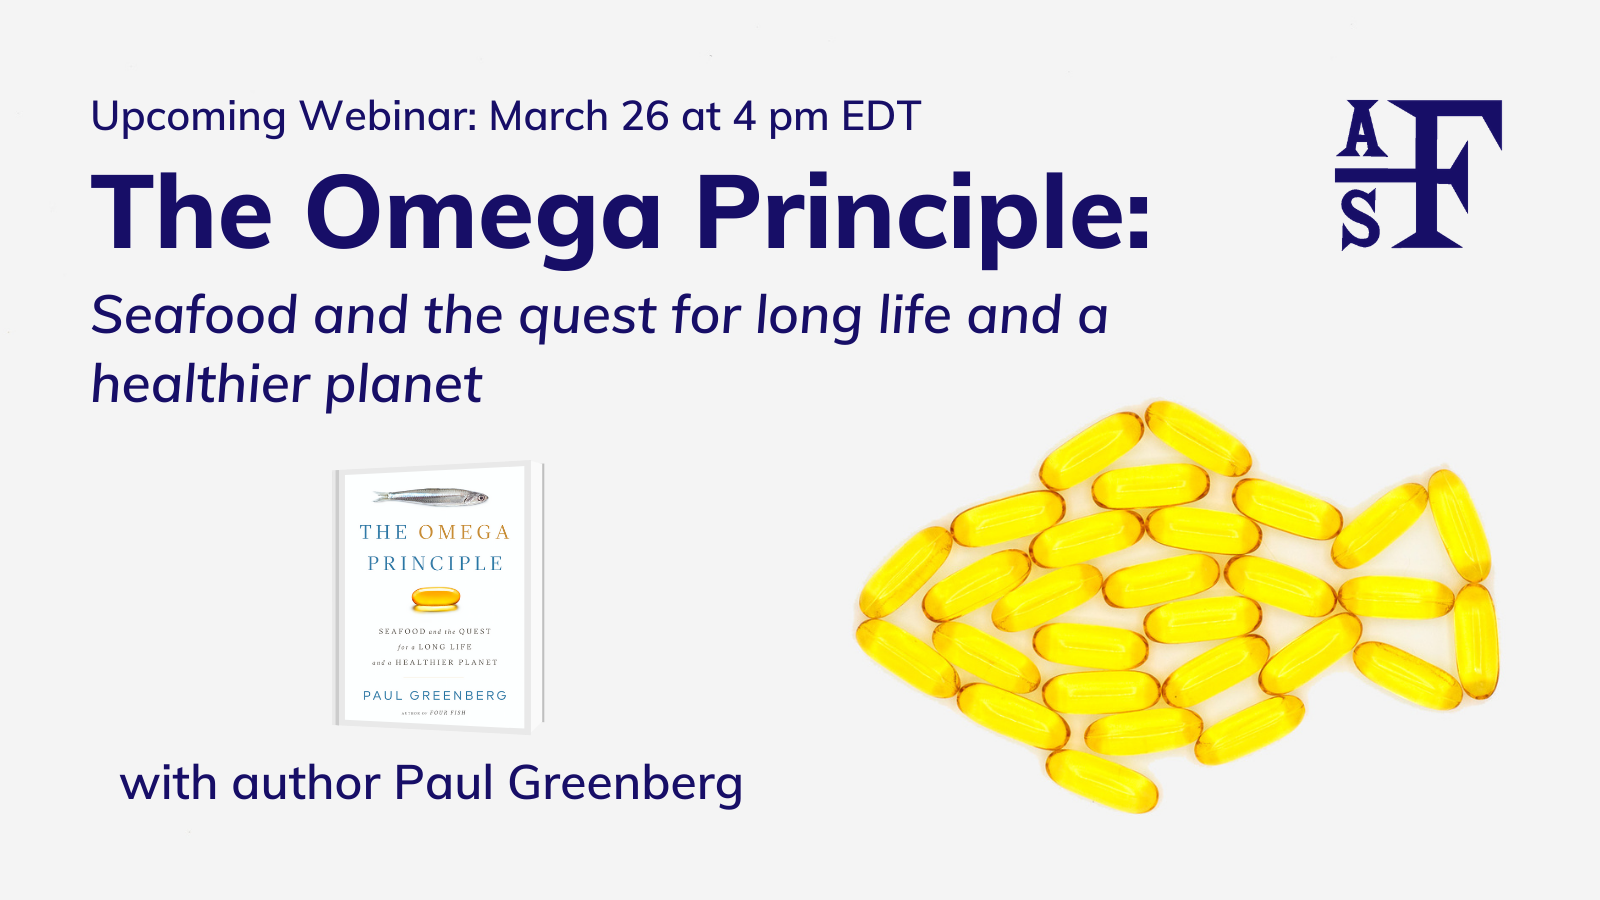 WEBINAR RECORDING: The Omega Principle: Seafood and the quest for long life and a healthier planet